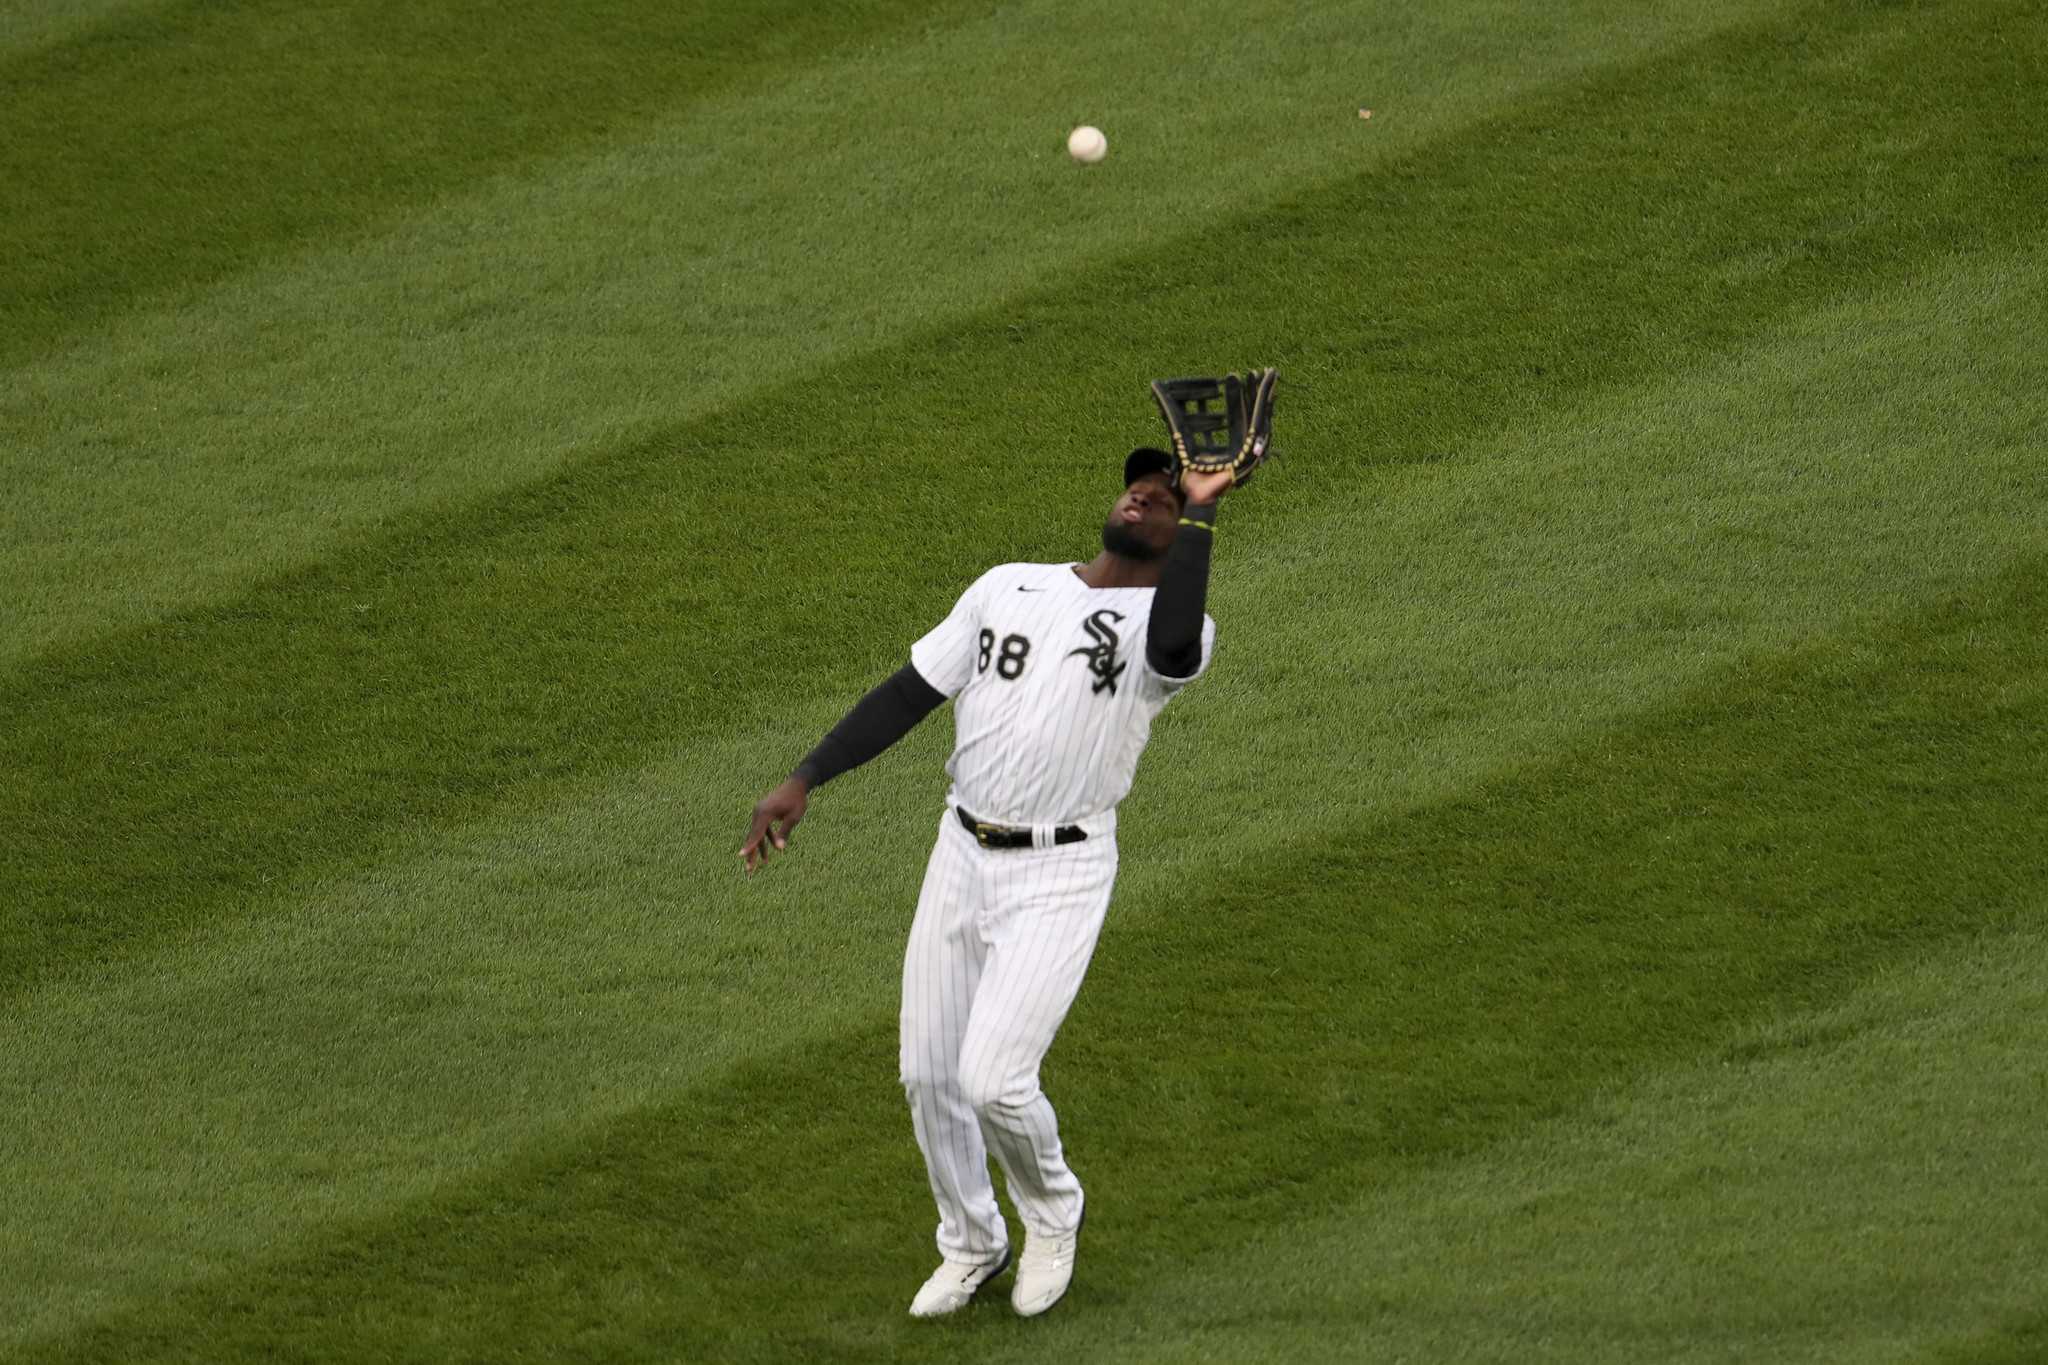 Photos: White Sox beat Royals in rainy home opener